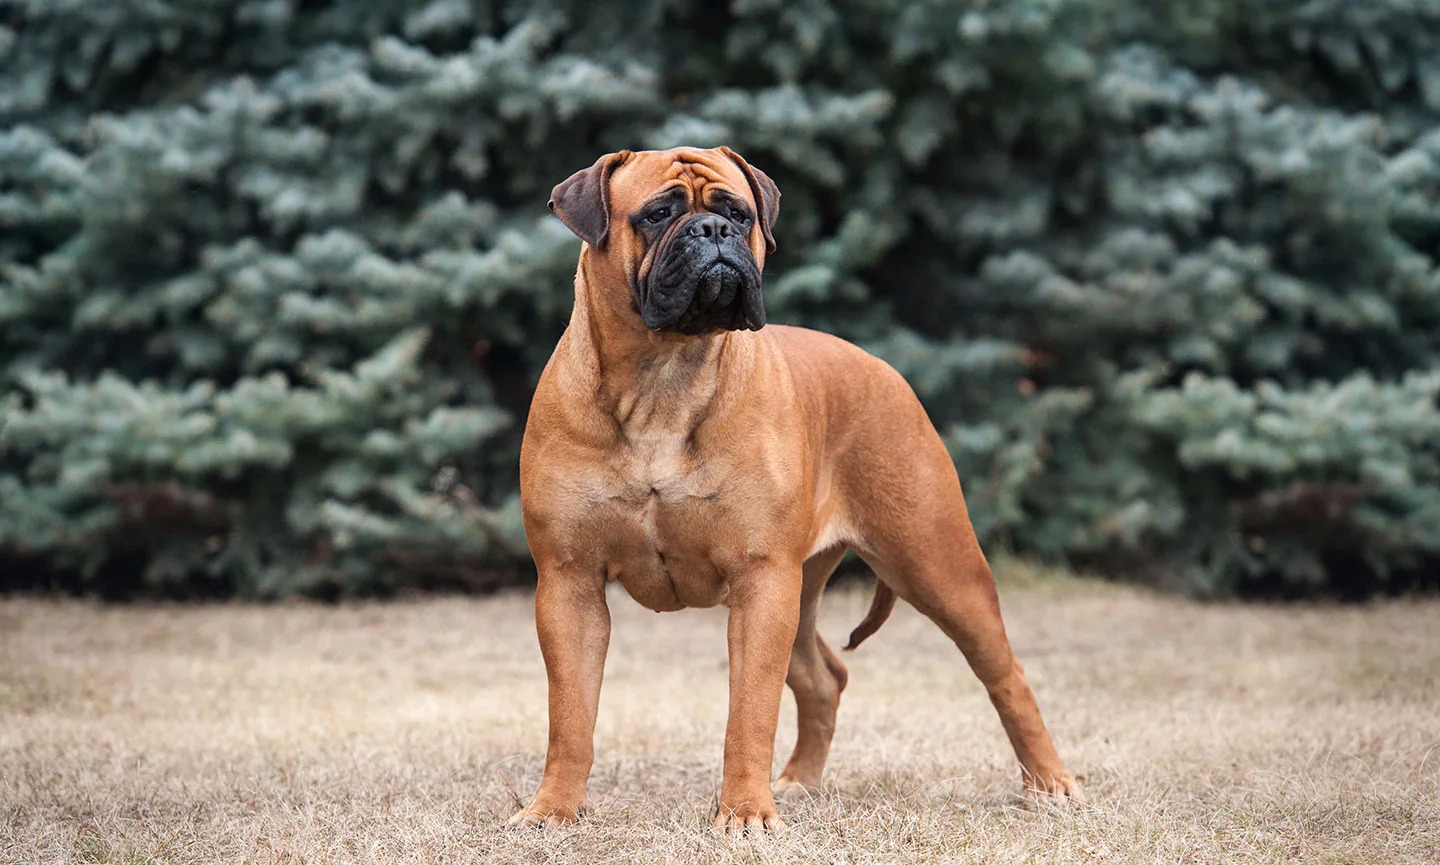 Only the Biggest Dog Lovers Can Identify All 20 of These Breeds 🐾 — Can You? Bullmastiff